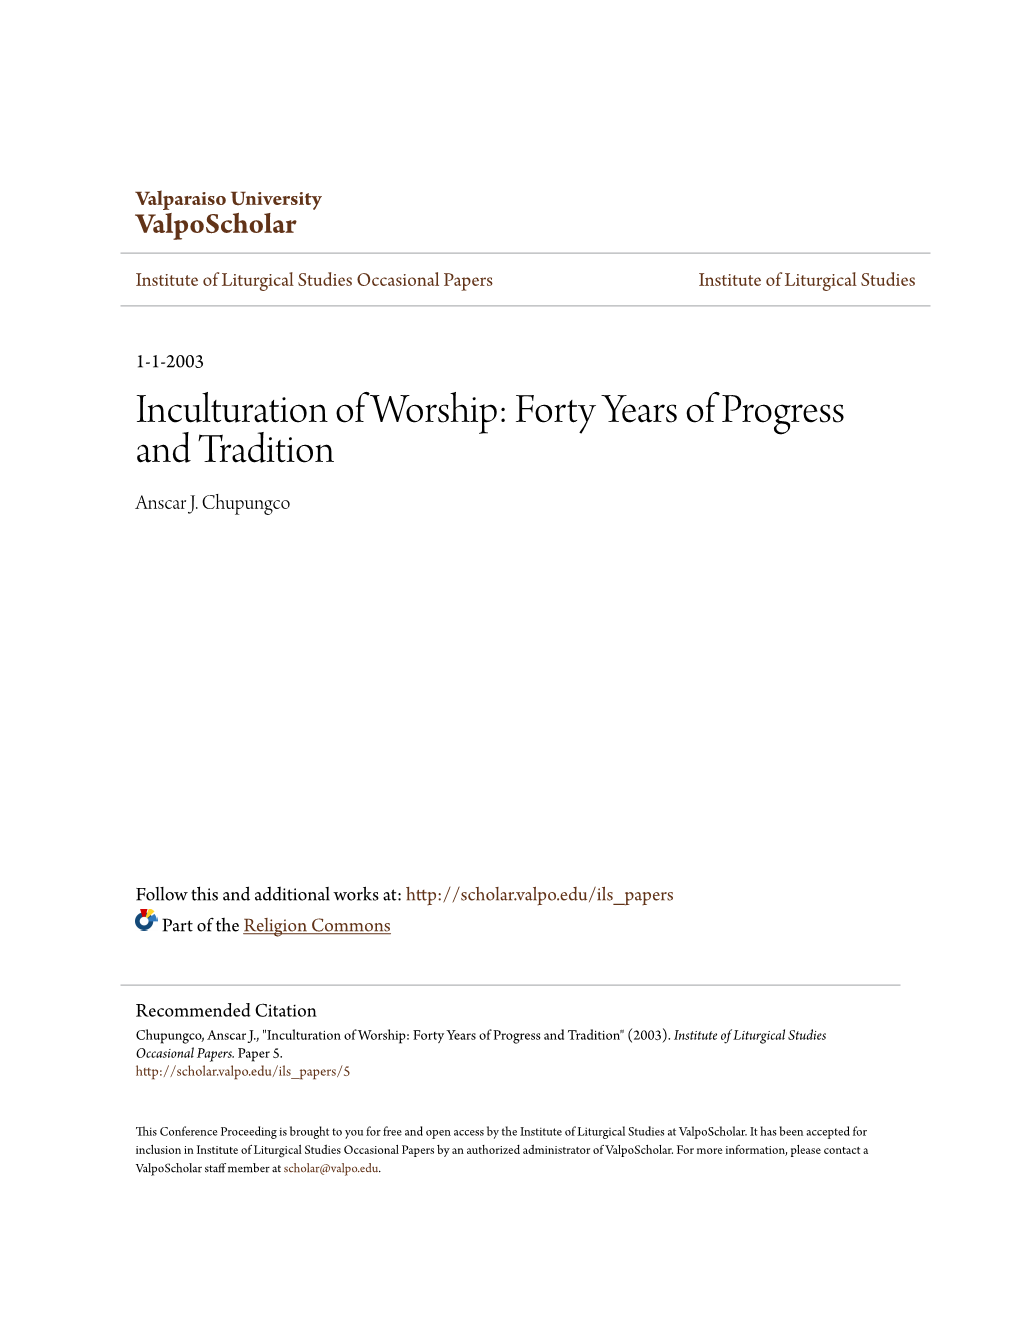 Inculturation of Worship: Forty Years of Progress and Tradition Anscar J